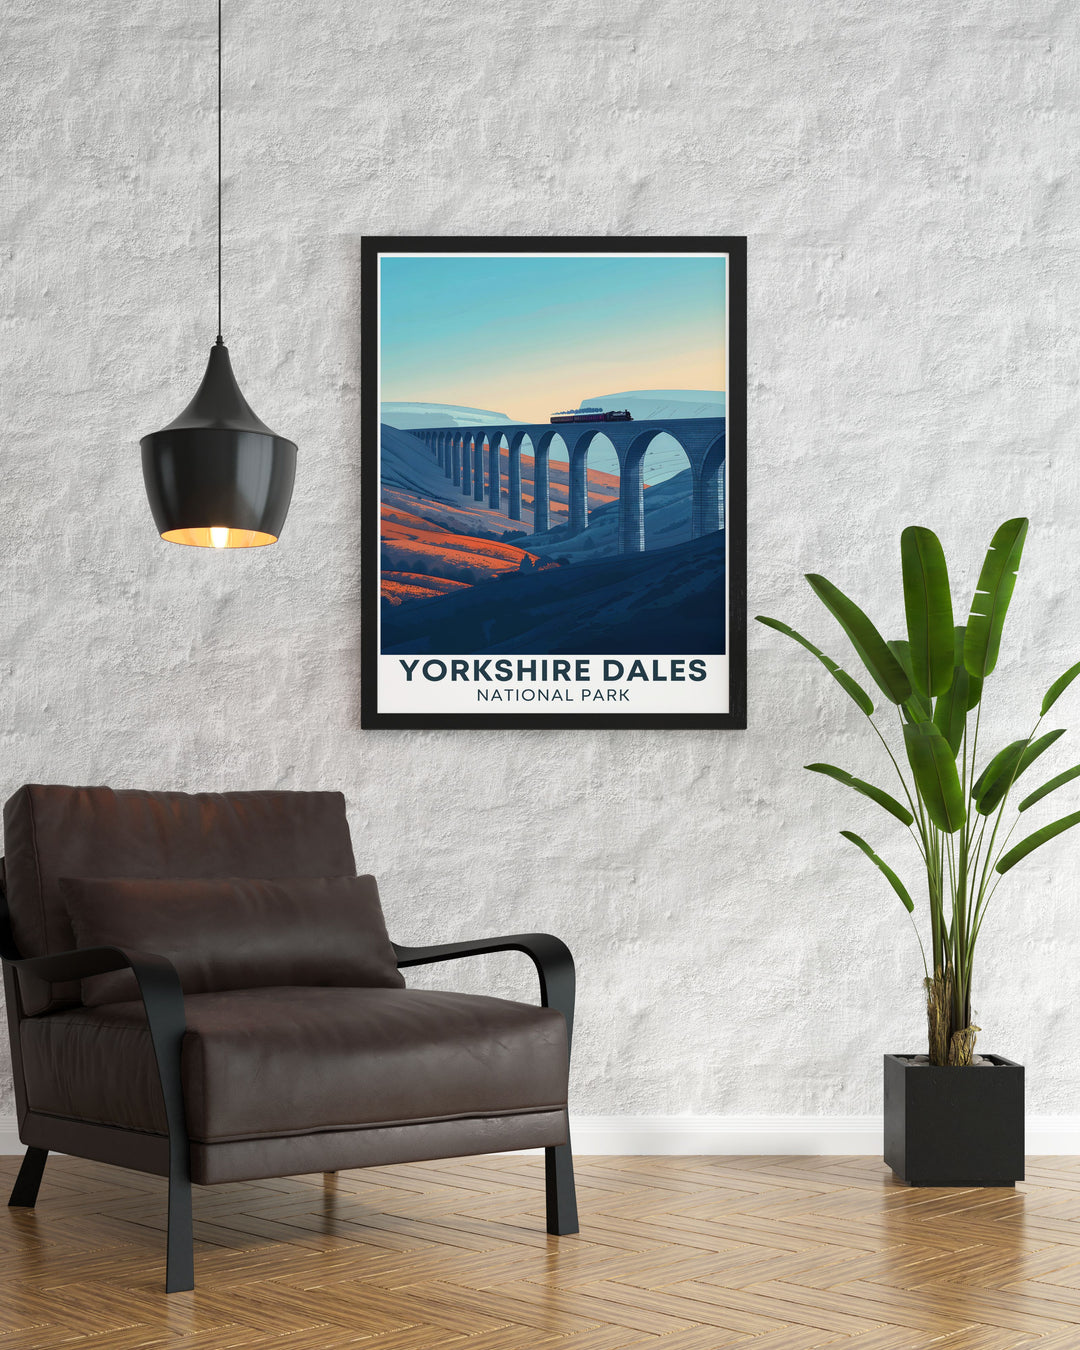 Zakynthos Wall Art featuring the vibrant culture and architectural elegance of Zakynthos Town alongside Ribblehead Viaducts iconic architecture, ideal for adding a touch of Greece to any space.